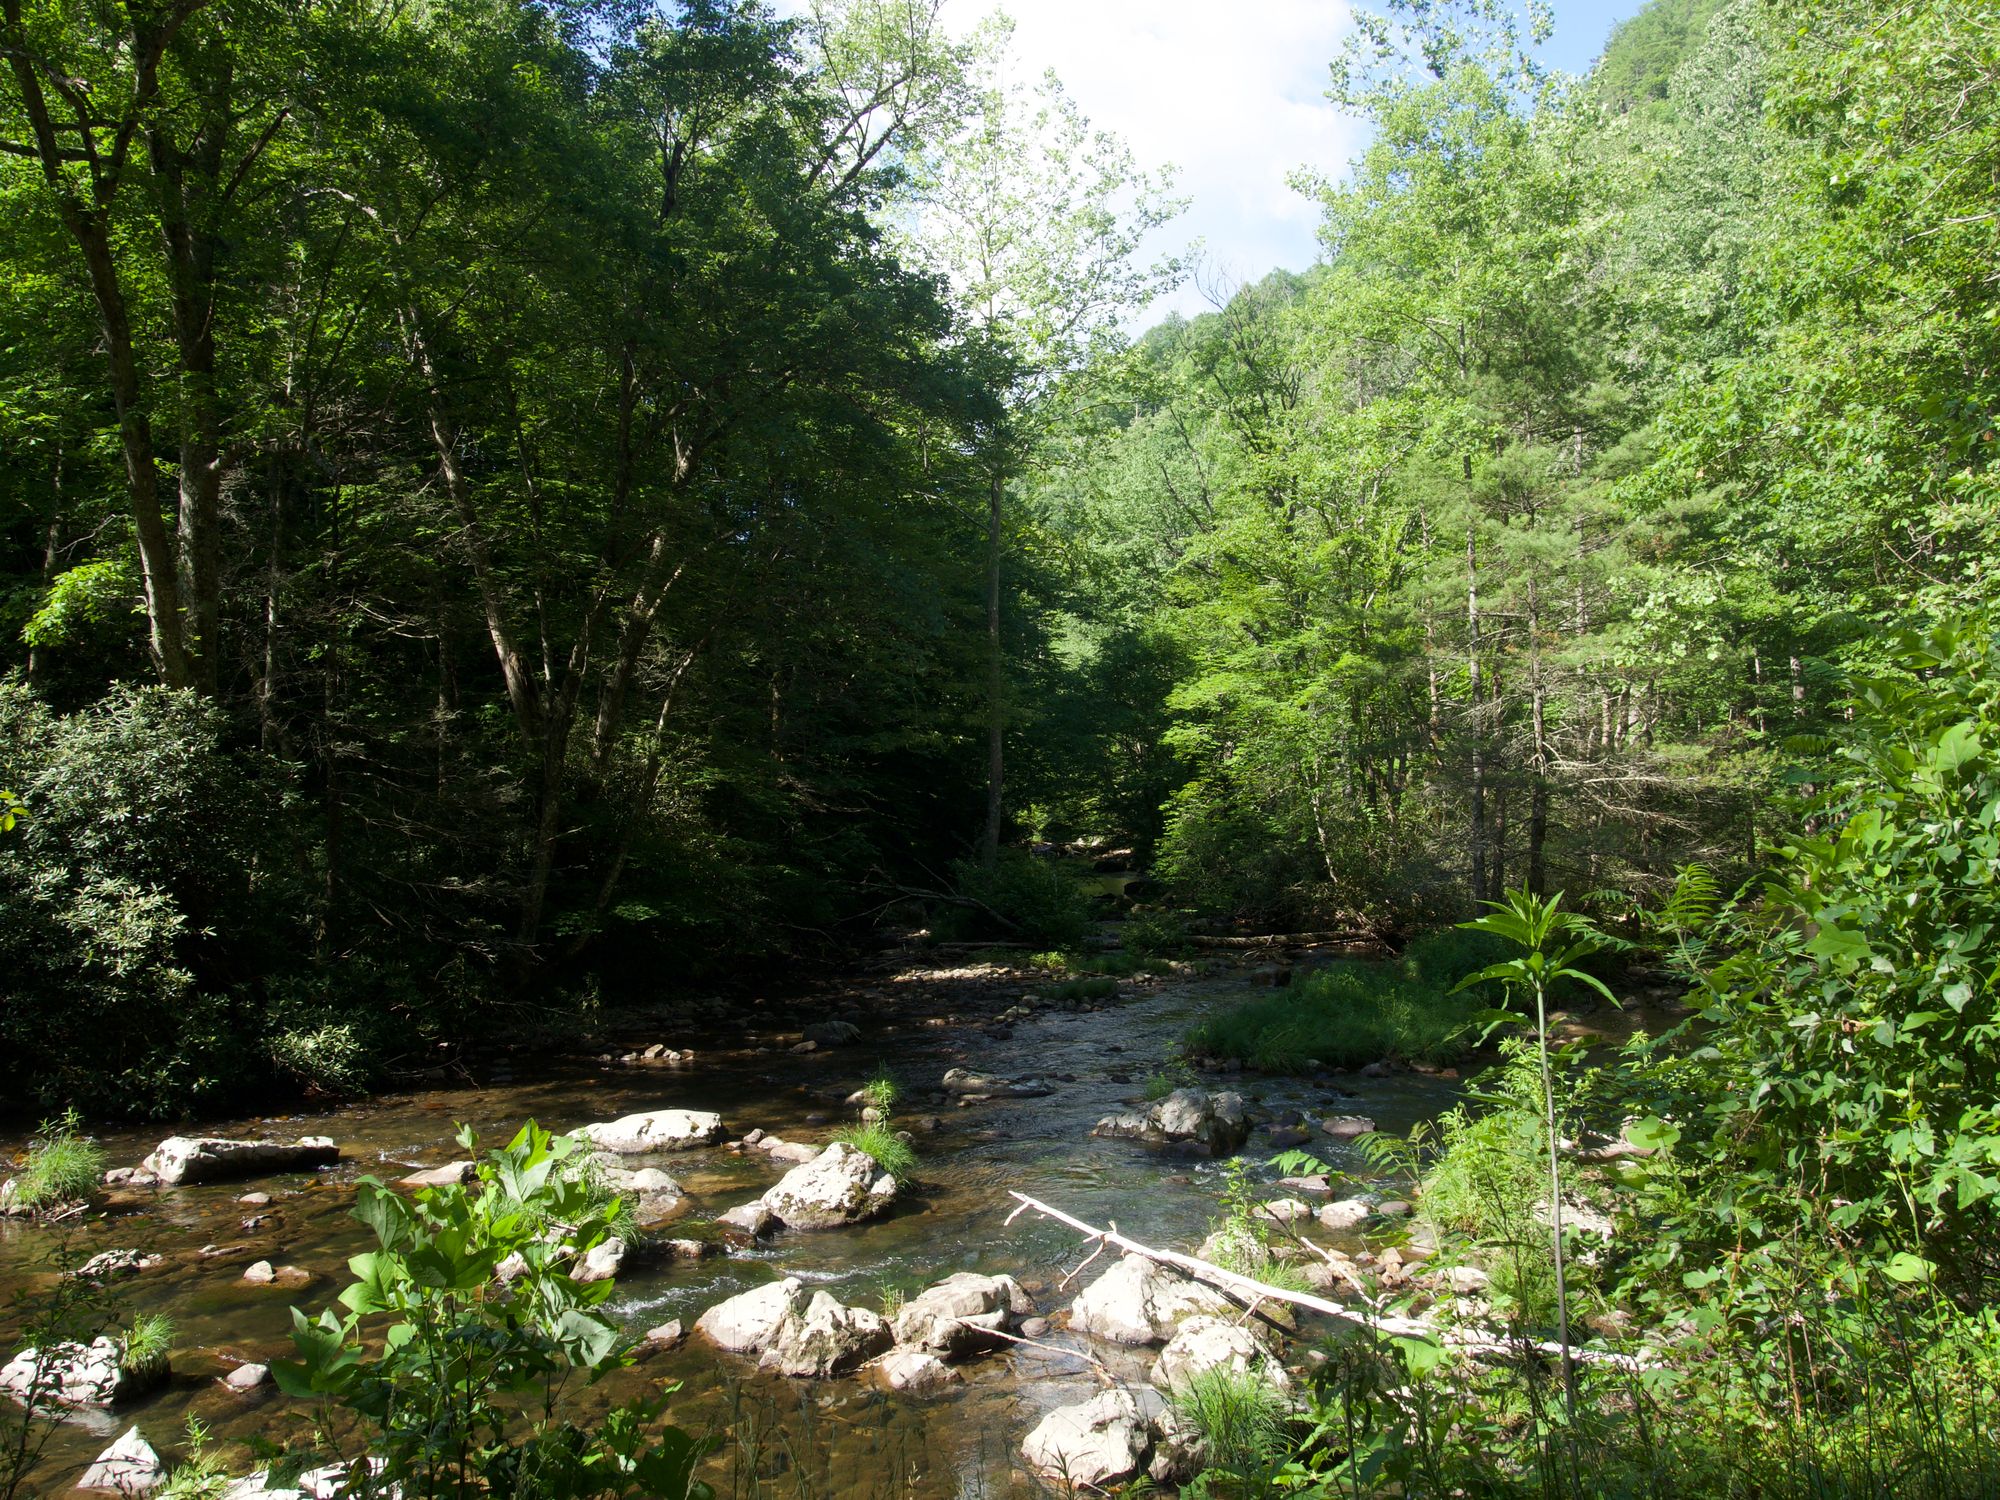 View of the creek with exposed rocks and lots of trees.